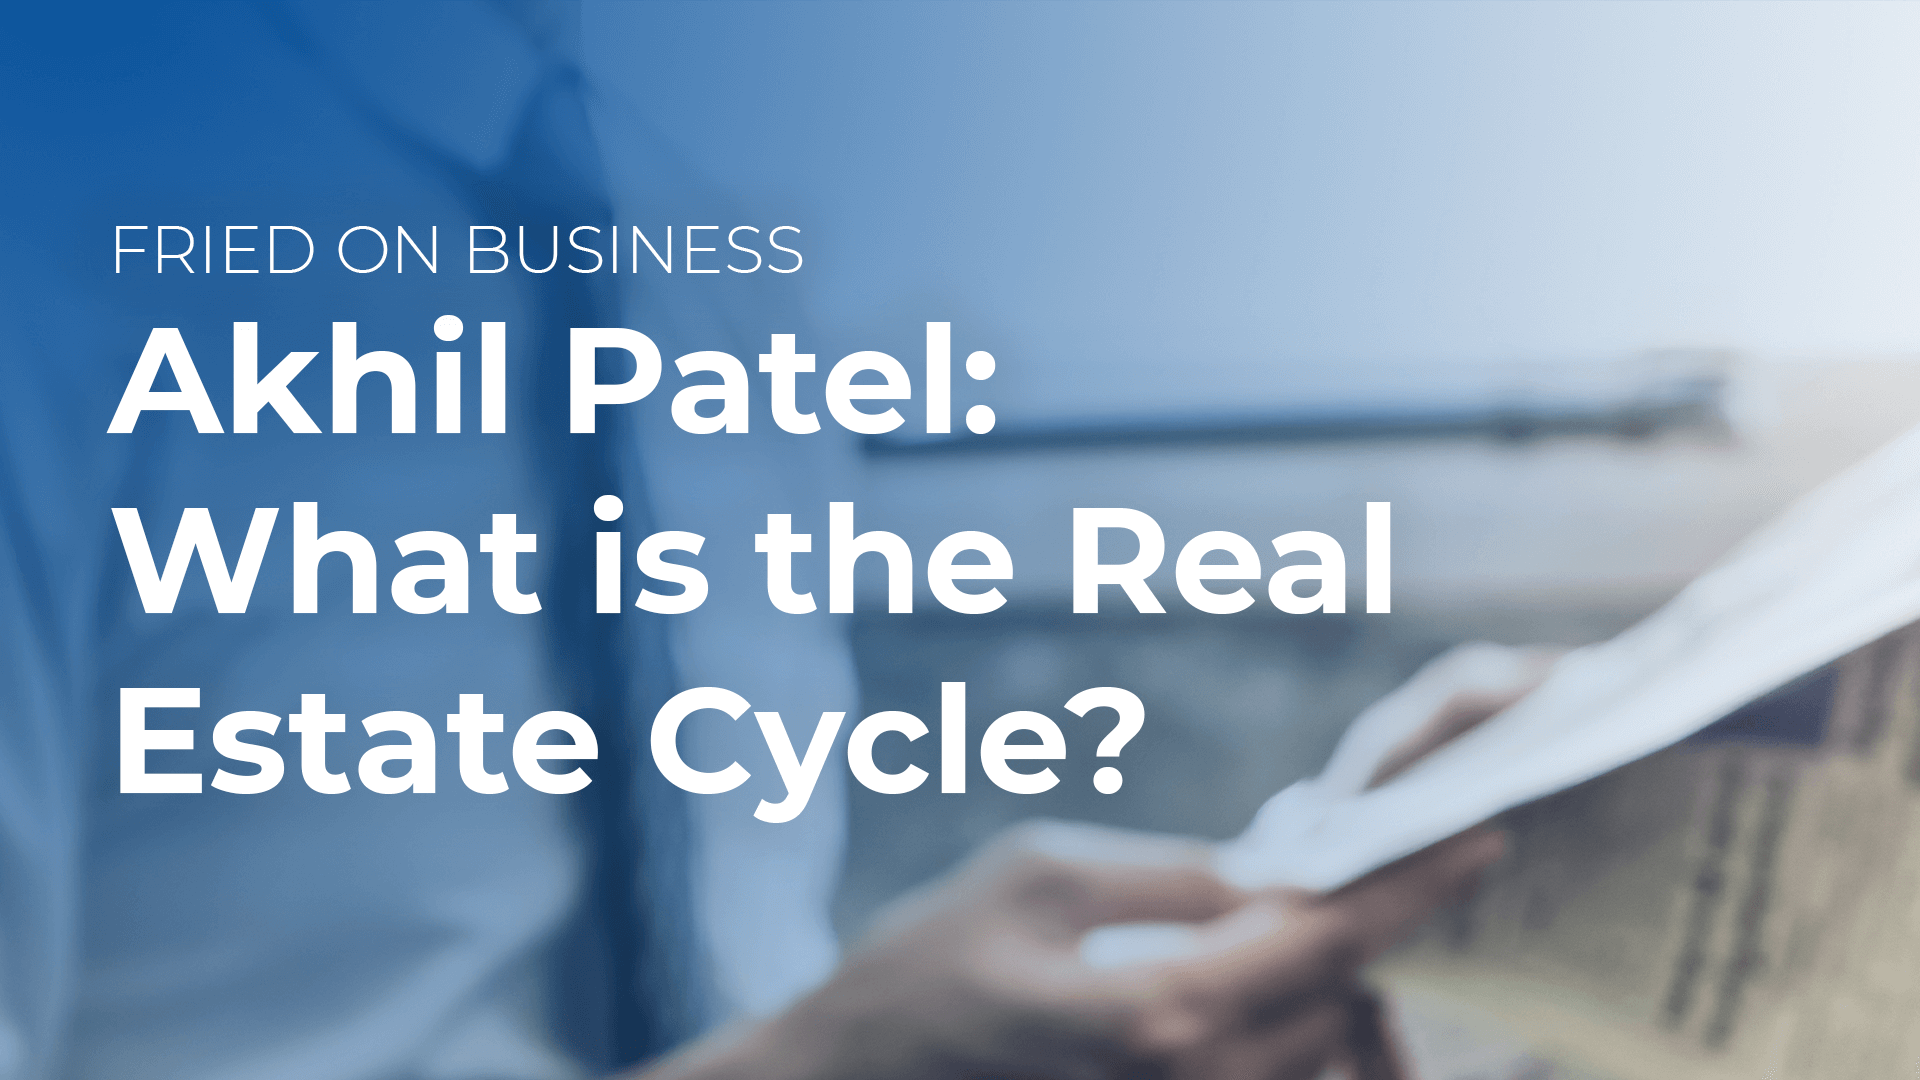 Akhil Patel - What is the Real Estate Cycle